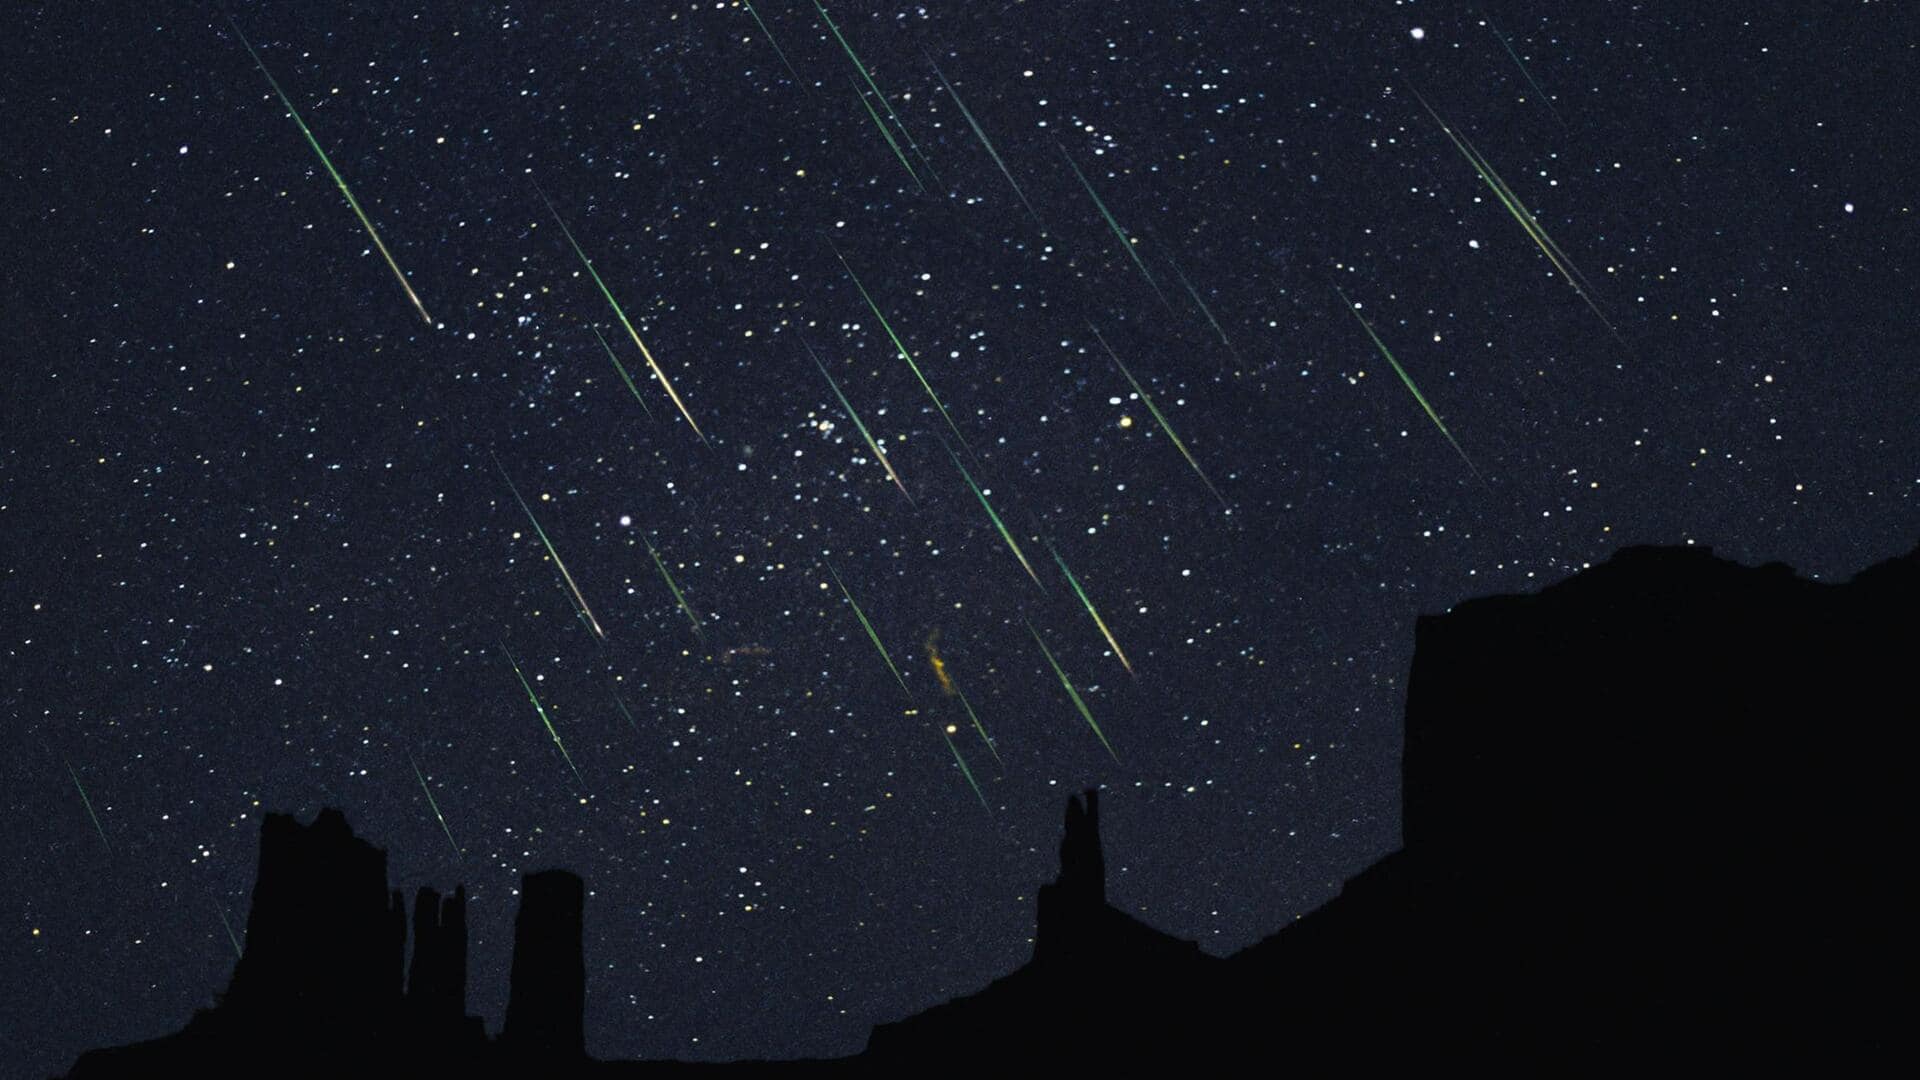 Leonid meteor shower starts today: How to watch shooting stars